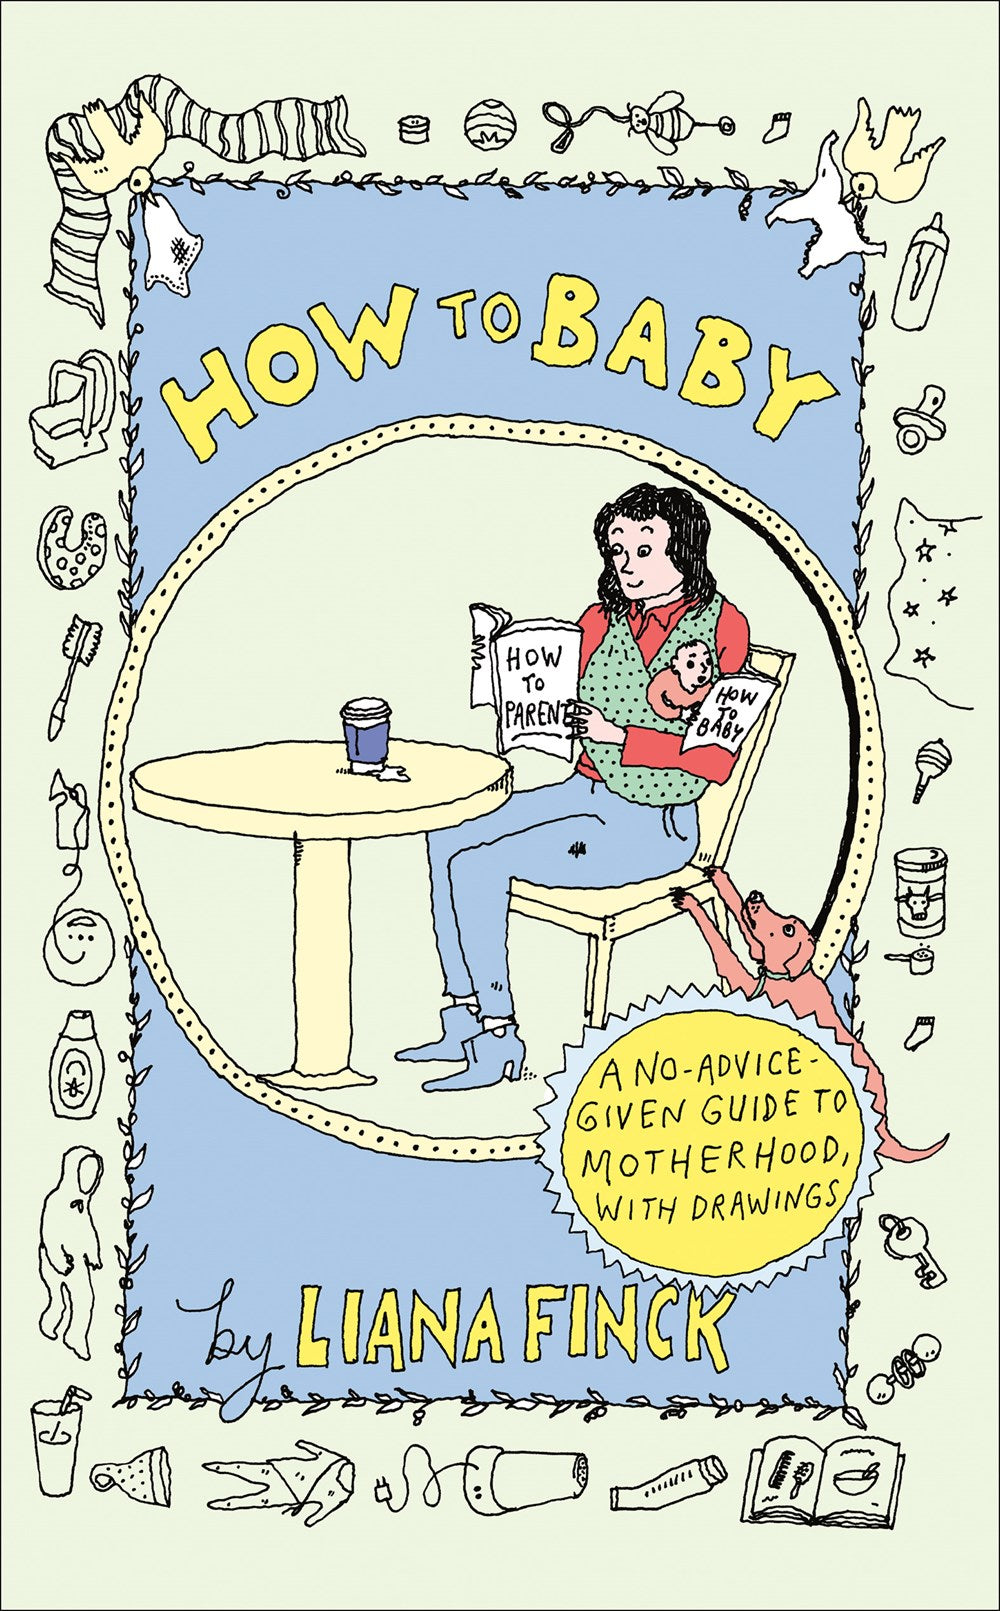 How To Baby: A No-Advice-Given Guide to Motherhood, with Drawings by Liana Finck (4/16/24)